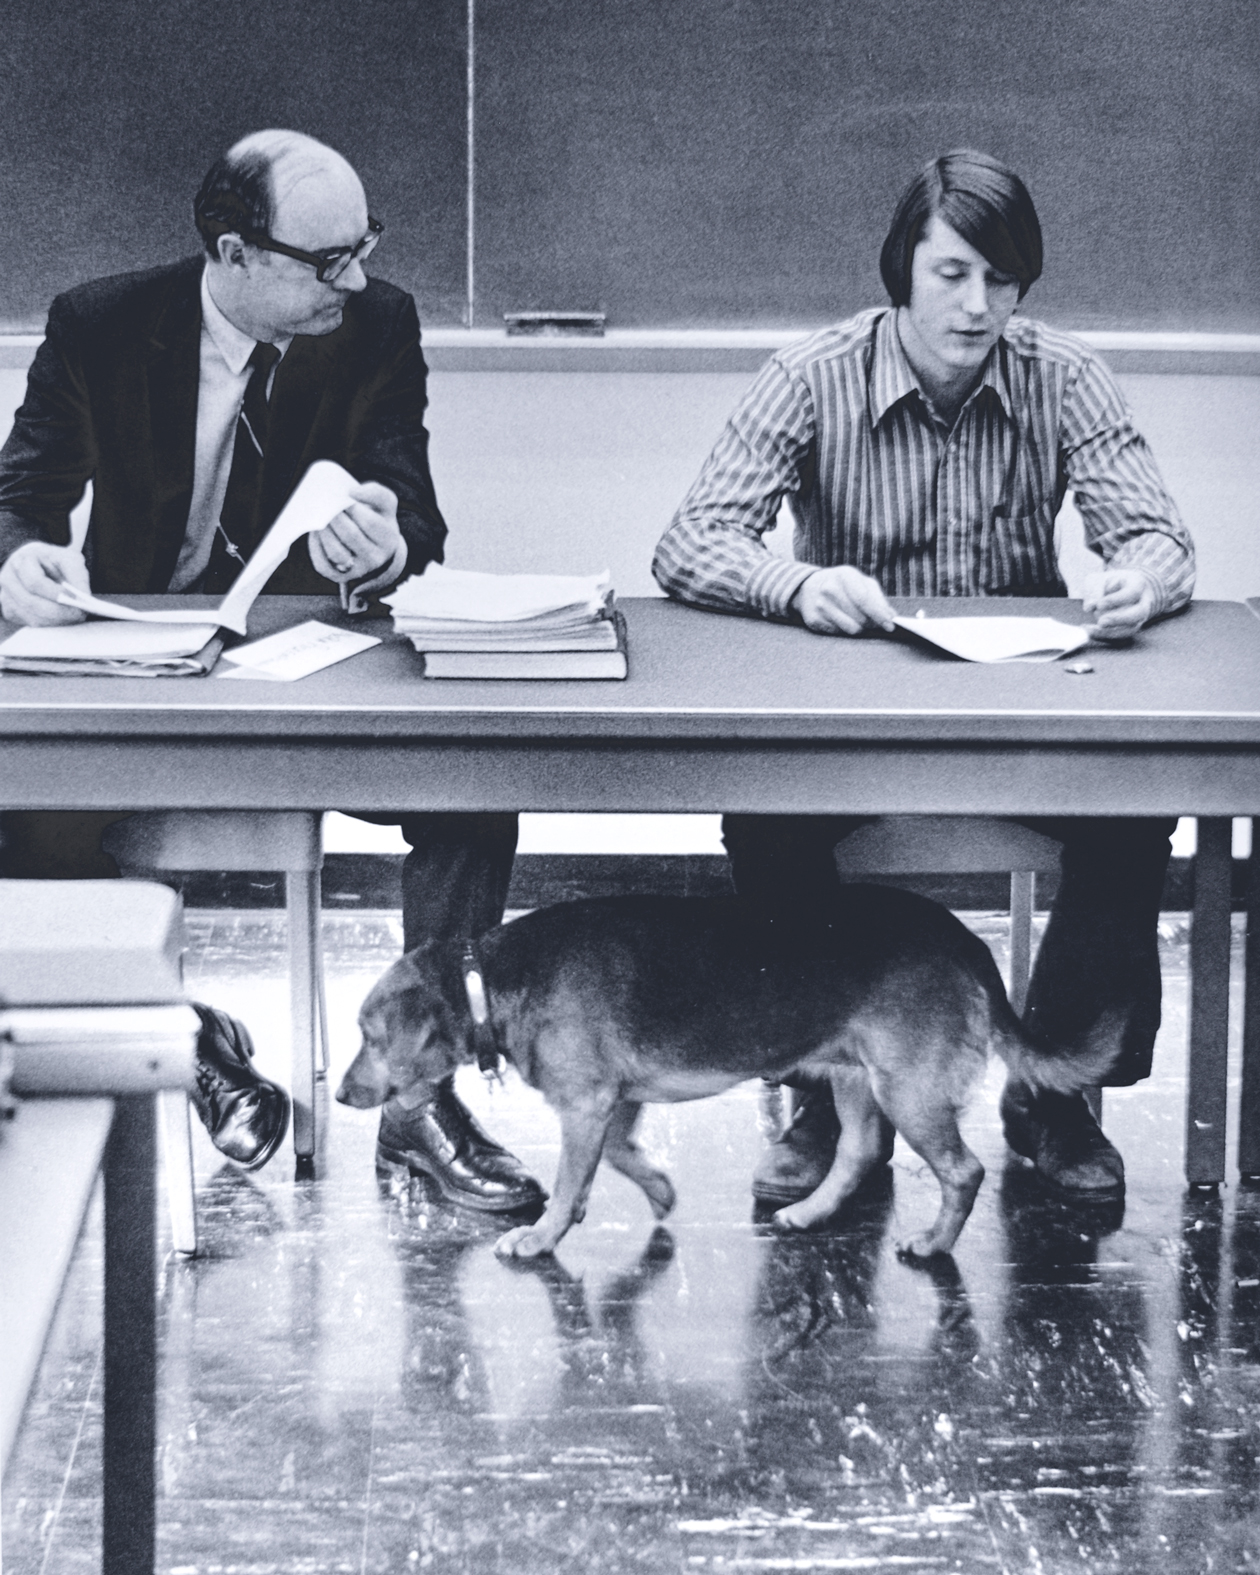 Dogs were long a constant presence on campus, outdoors and in